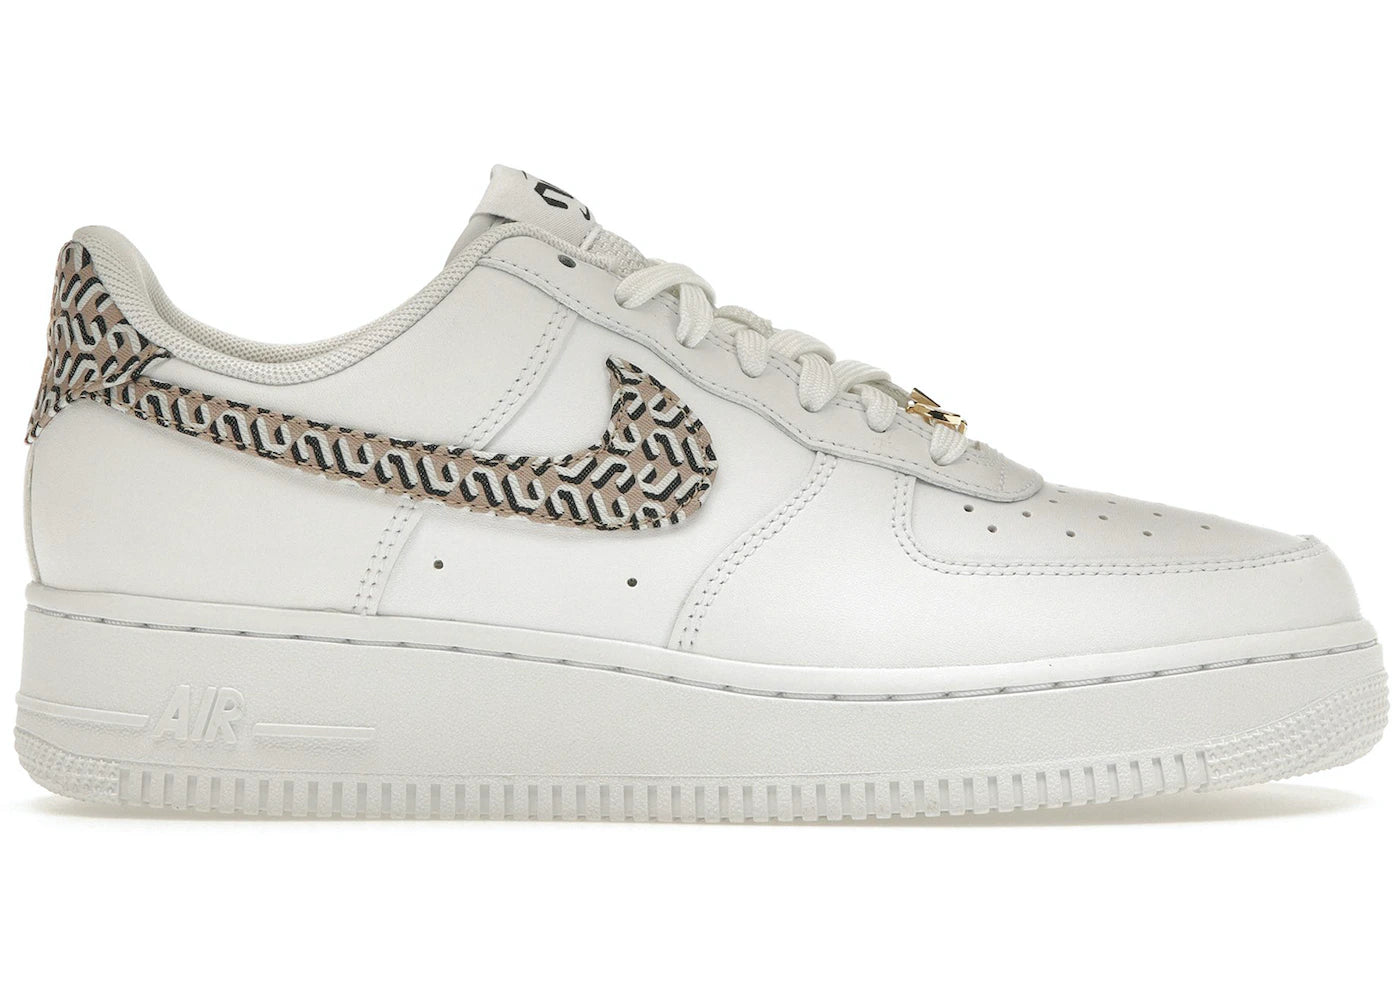 Nike Air Force 1 Low LX United in Victory White (Women's)